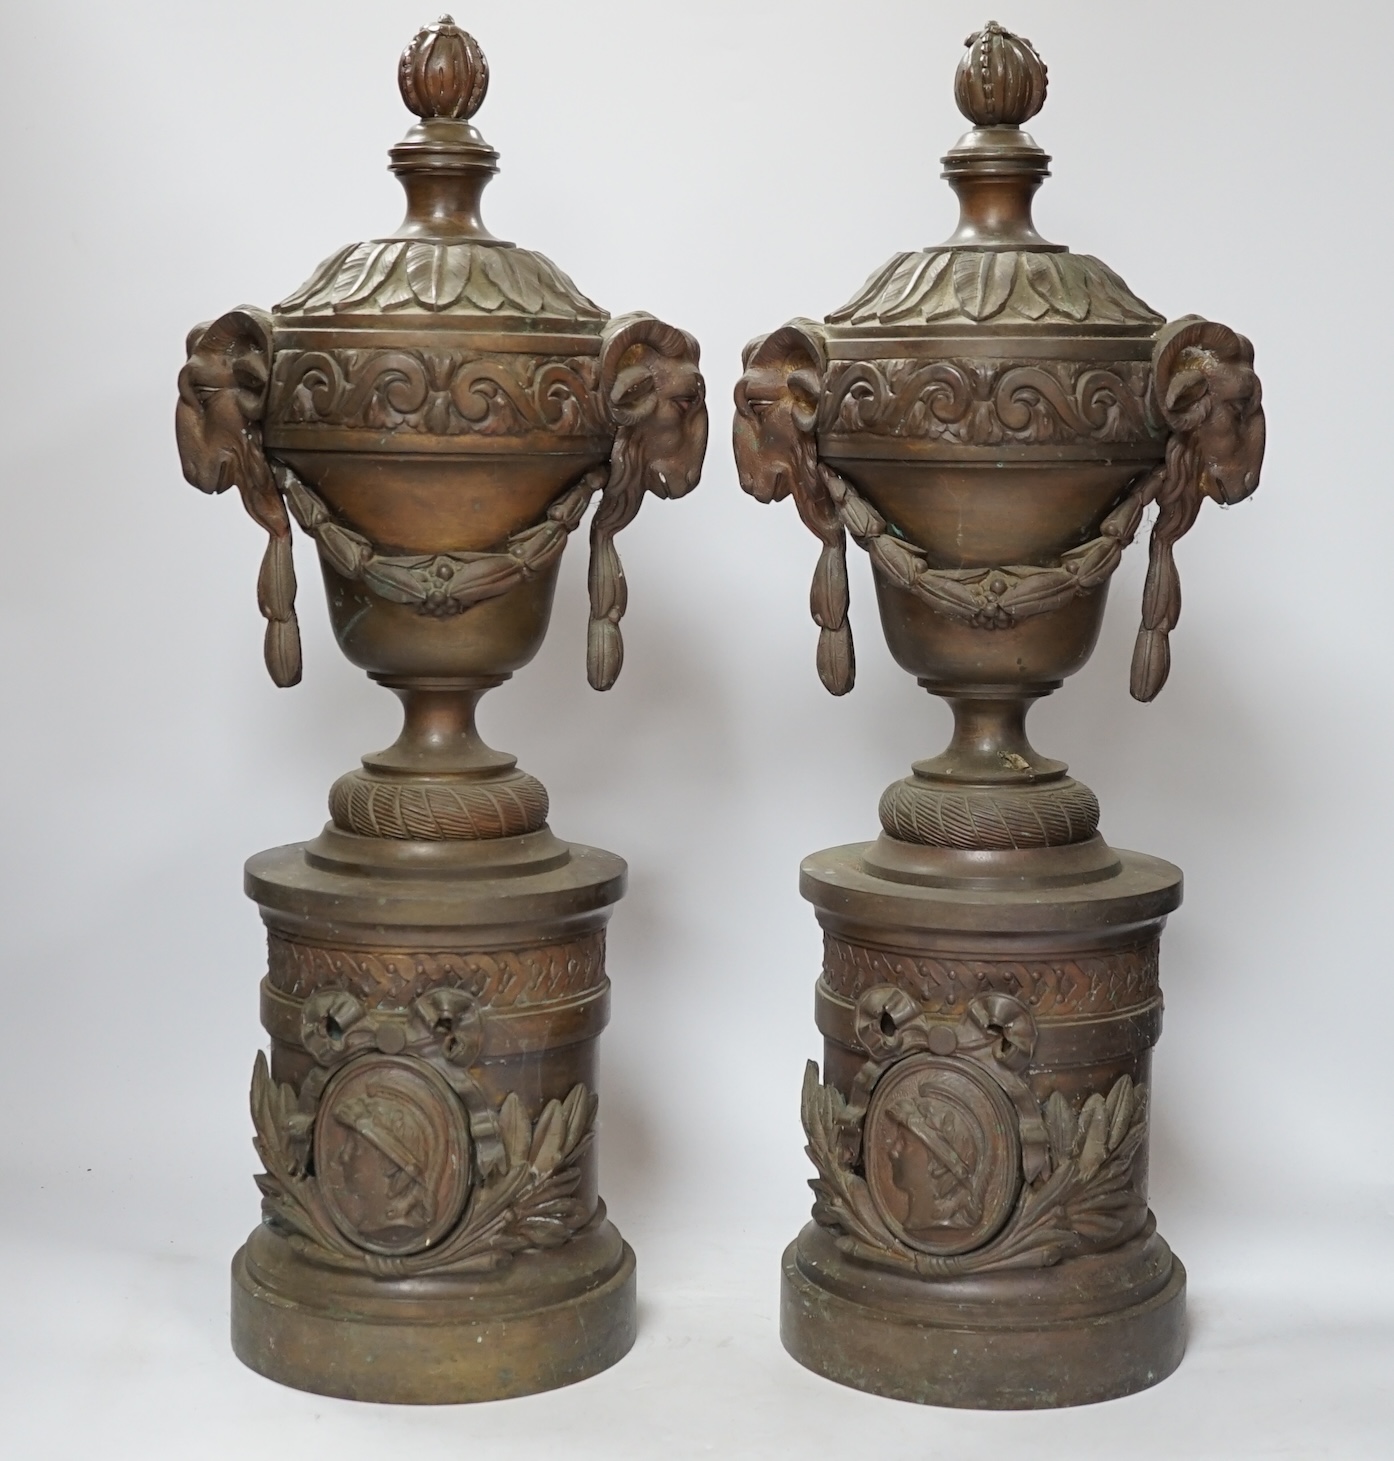 A pair of bronze urns with rams head, Roman mask and swag decoration, 53cm high